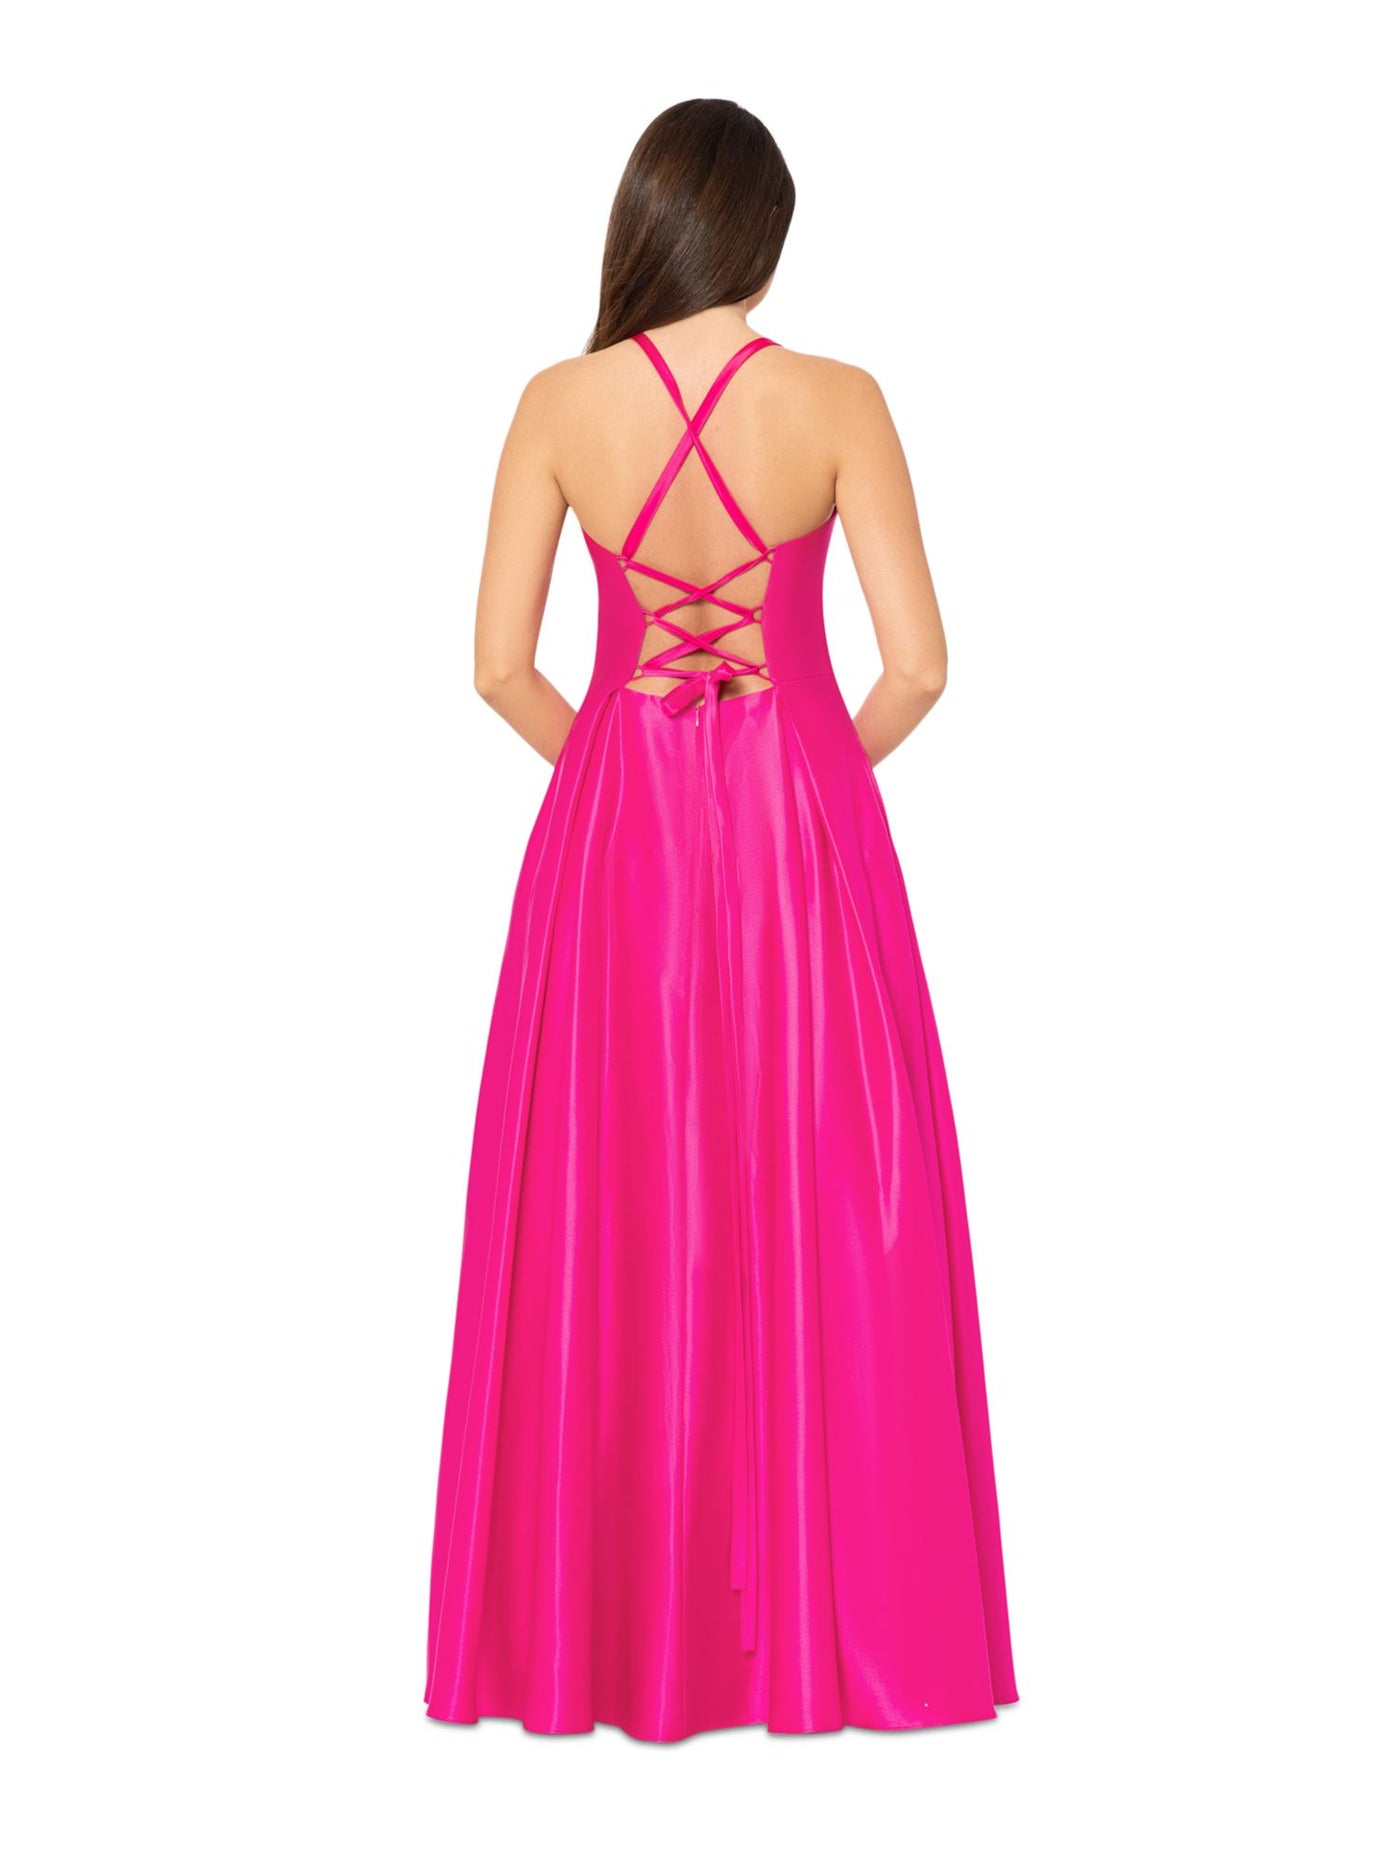 BLONDIE NITES Womens Pink Zippered Pocketed Lace-up Corset Bodice Lined Sleeveless Sweetheart Neckline Full-Length Formal Gown Dress Juniors 5